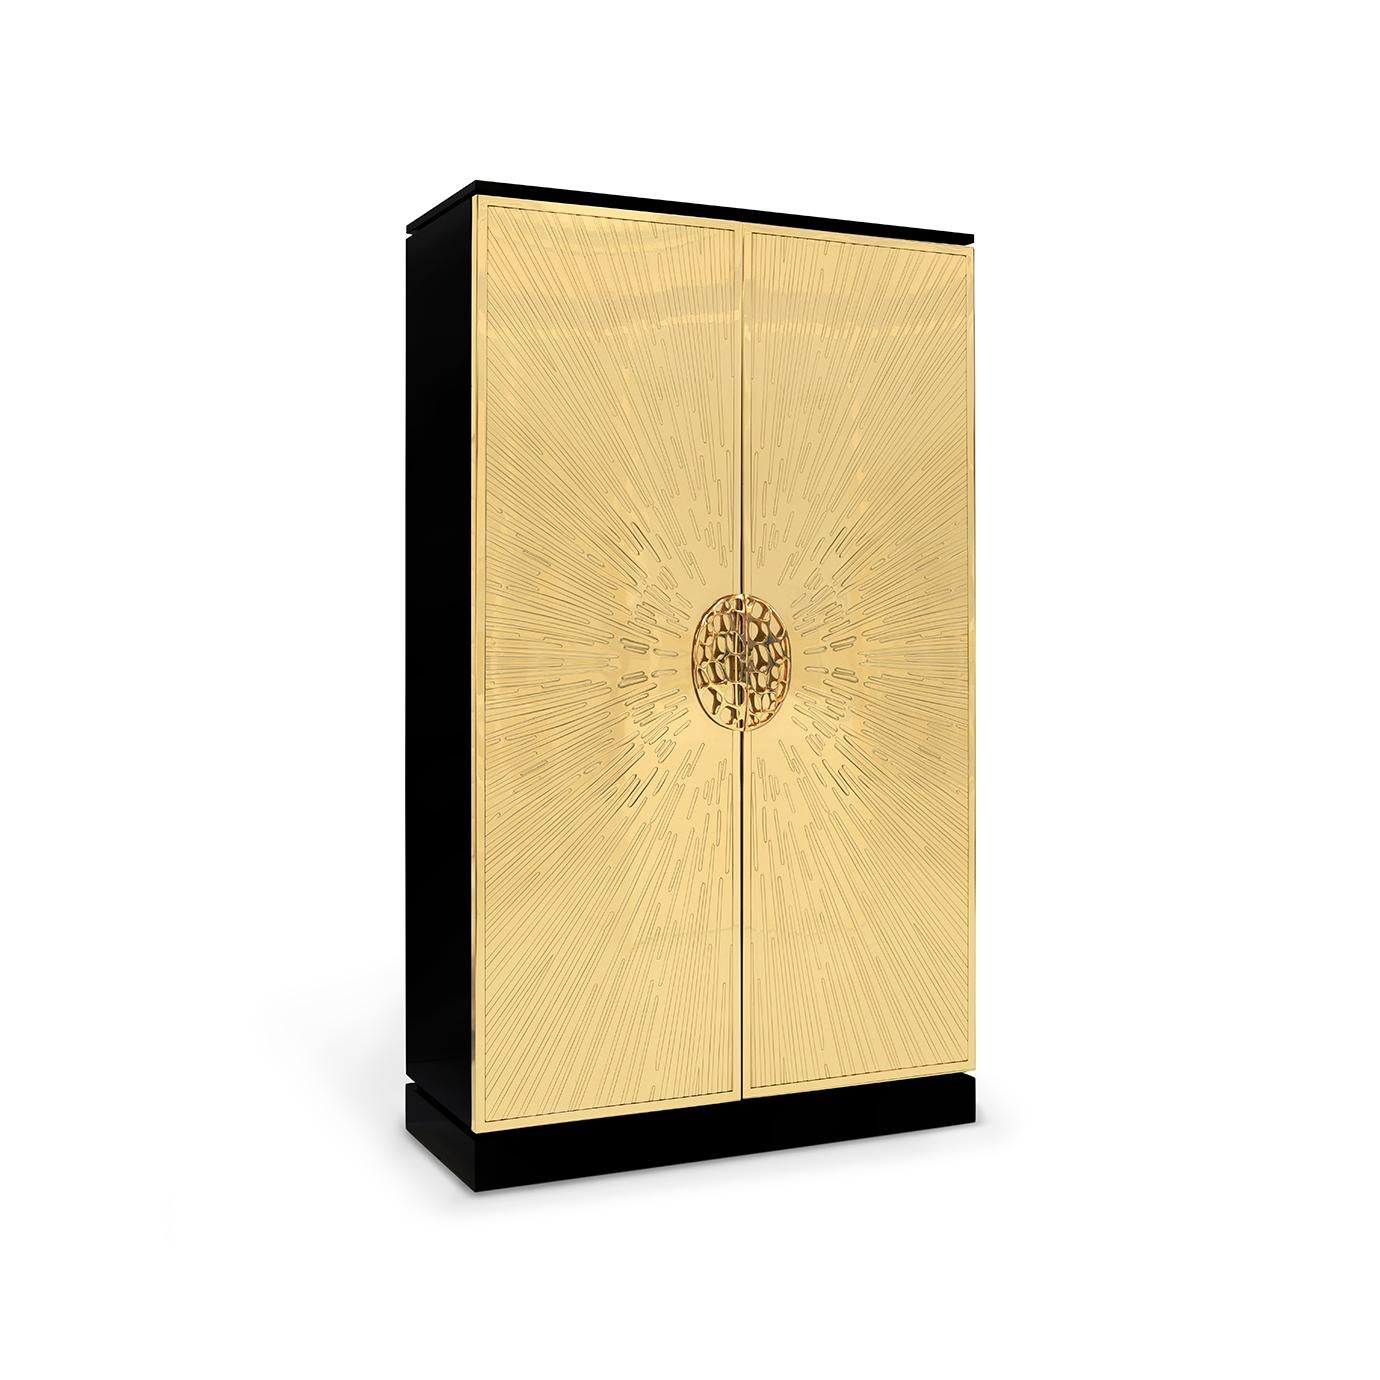 Dripping like honey with KOKET glamor, Heive is the Queen Bee of timeless black and gold cabinets. The alluring golden doors feature an exploding sunburst design enchanting you at first glance. For her majestic crowning touch, an enticing honeycomb